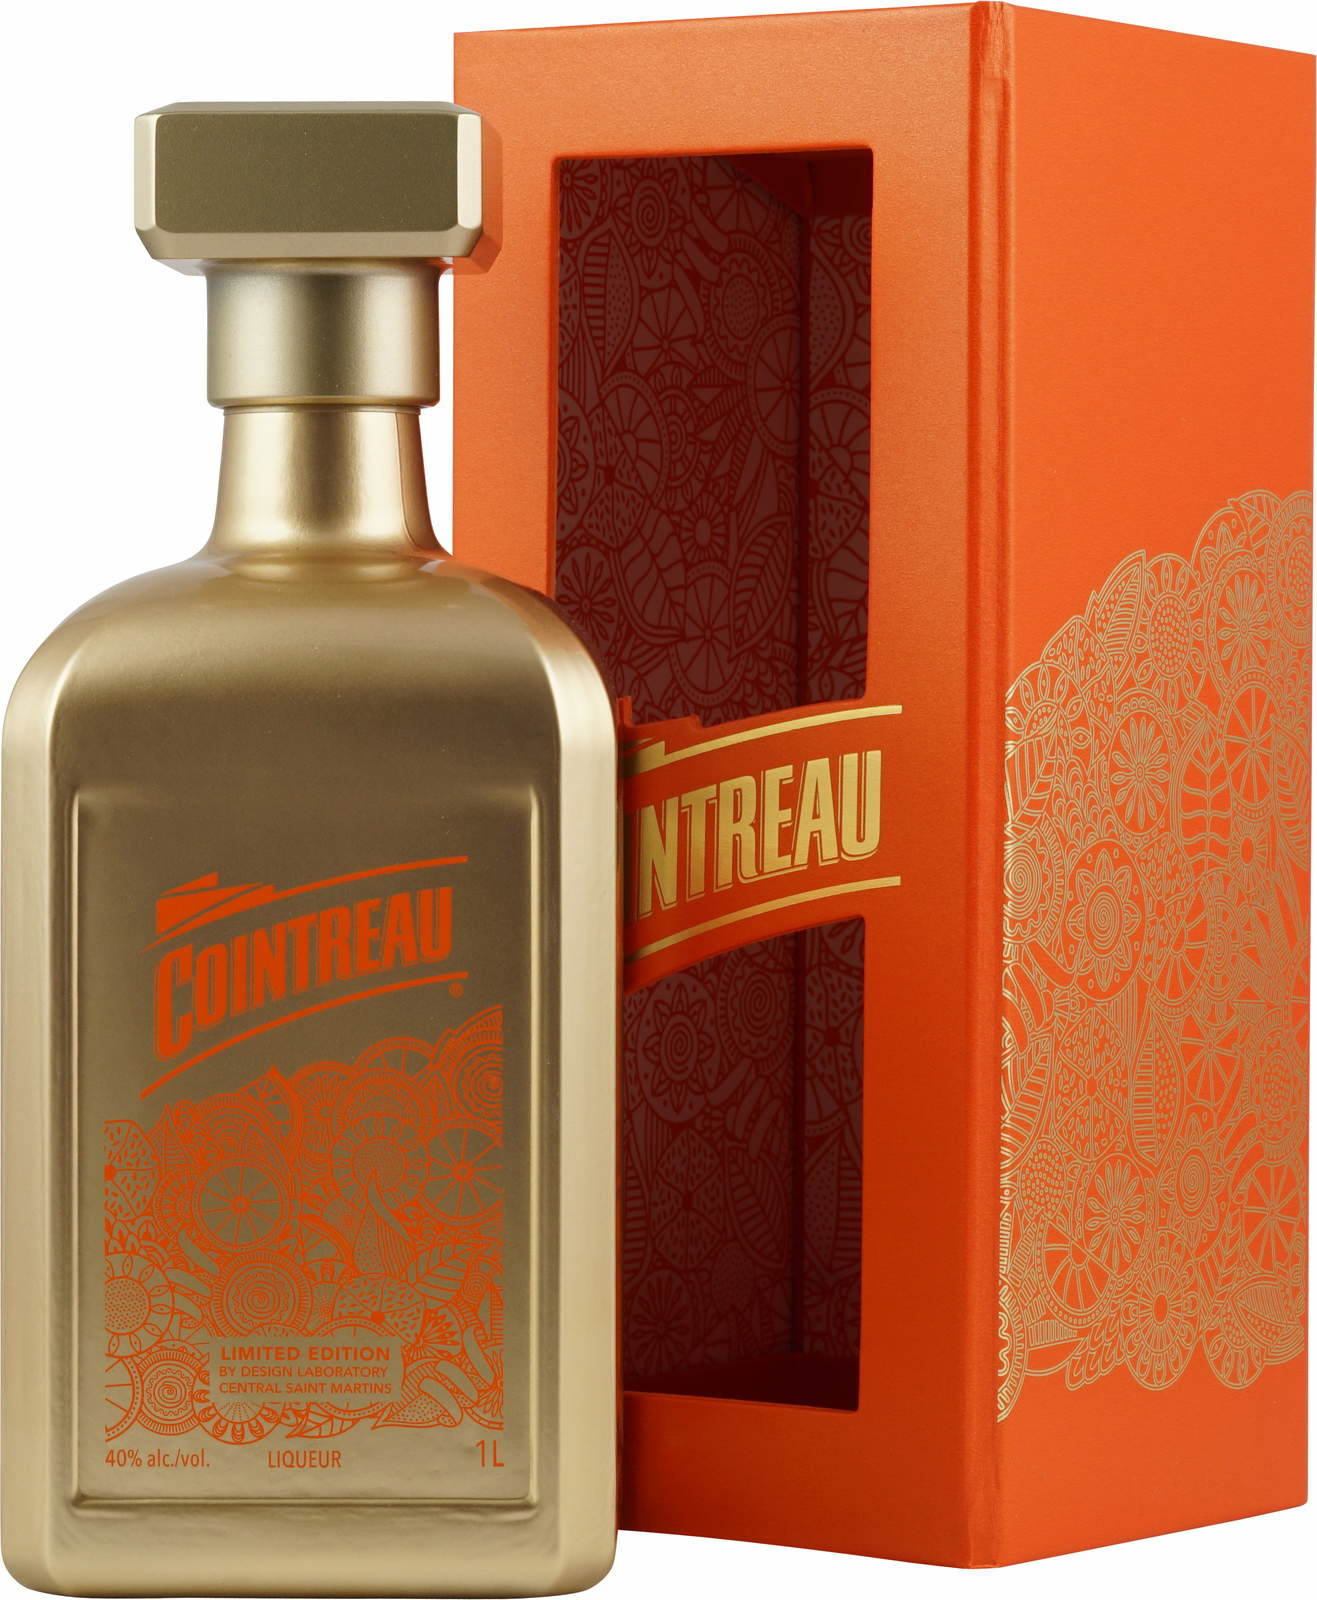 Liter % 40 1,0 Selective Cointreau Edition The lim Vol.